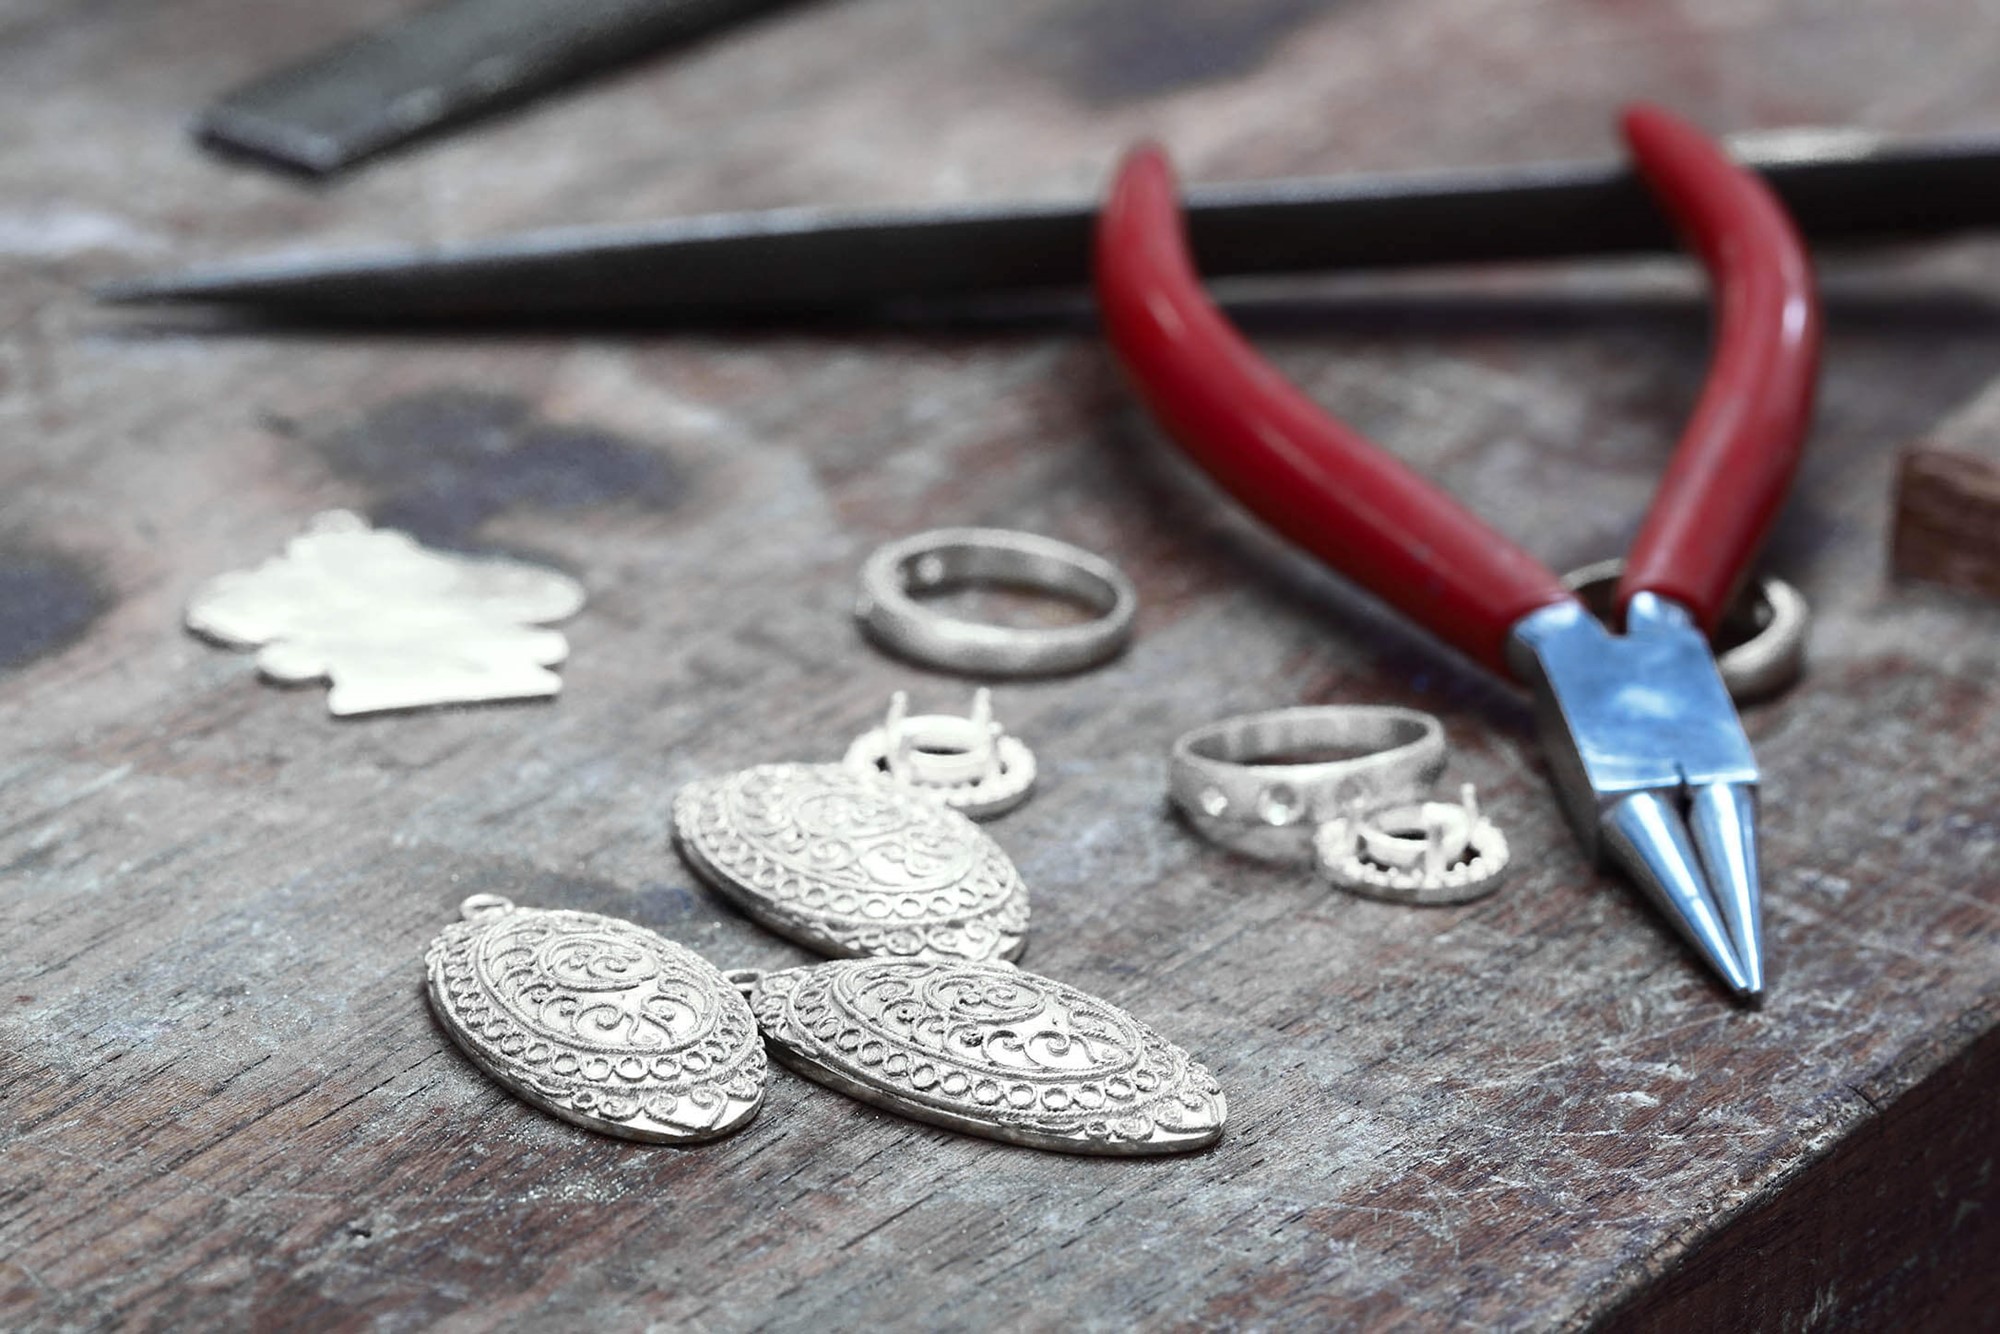 Silversmithing and jewellery tools